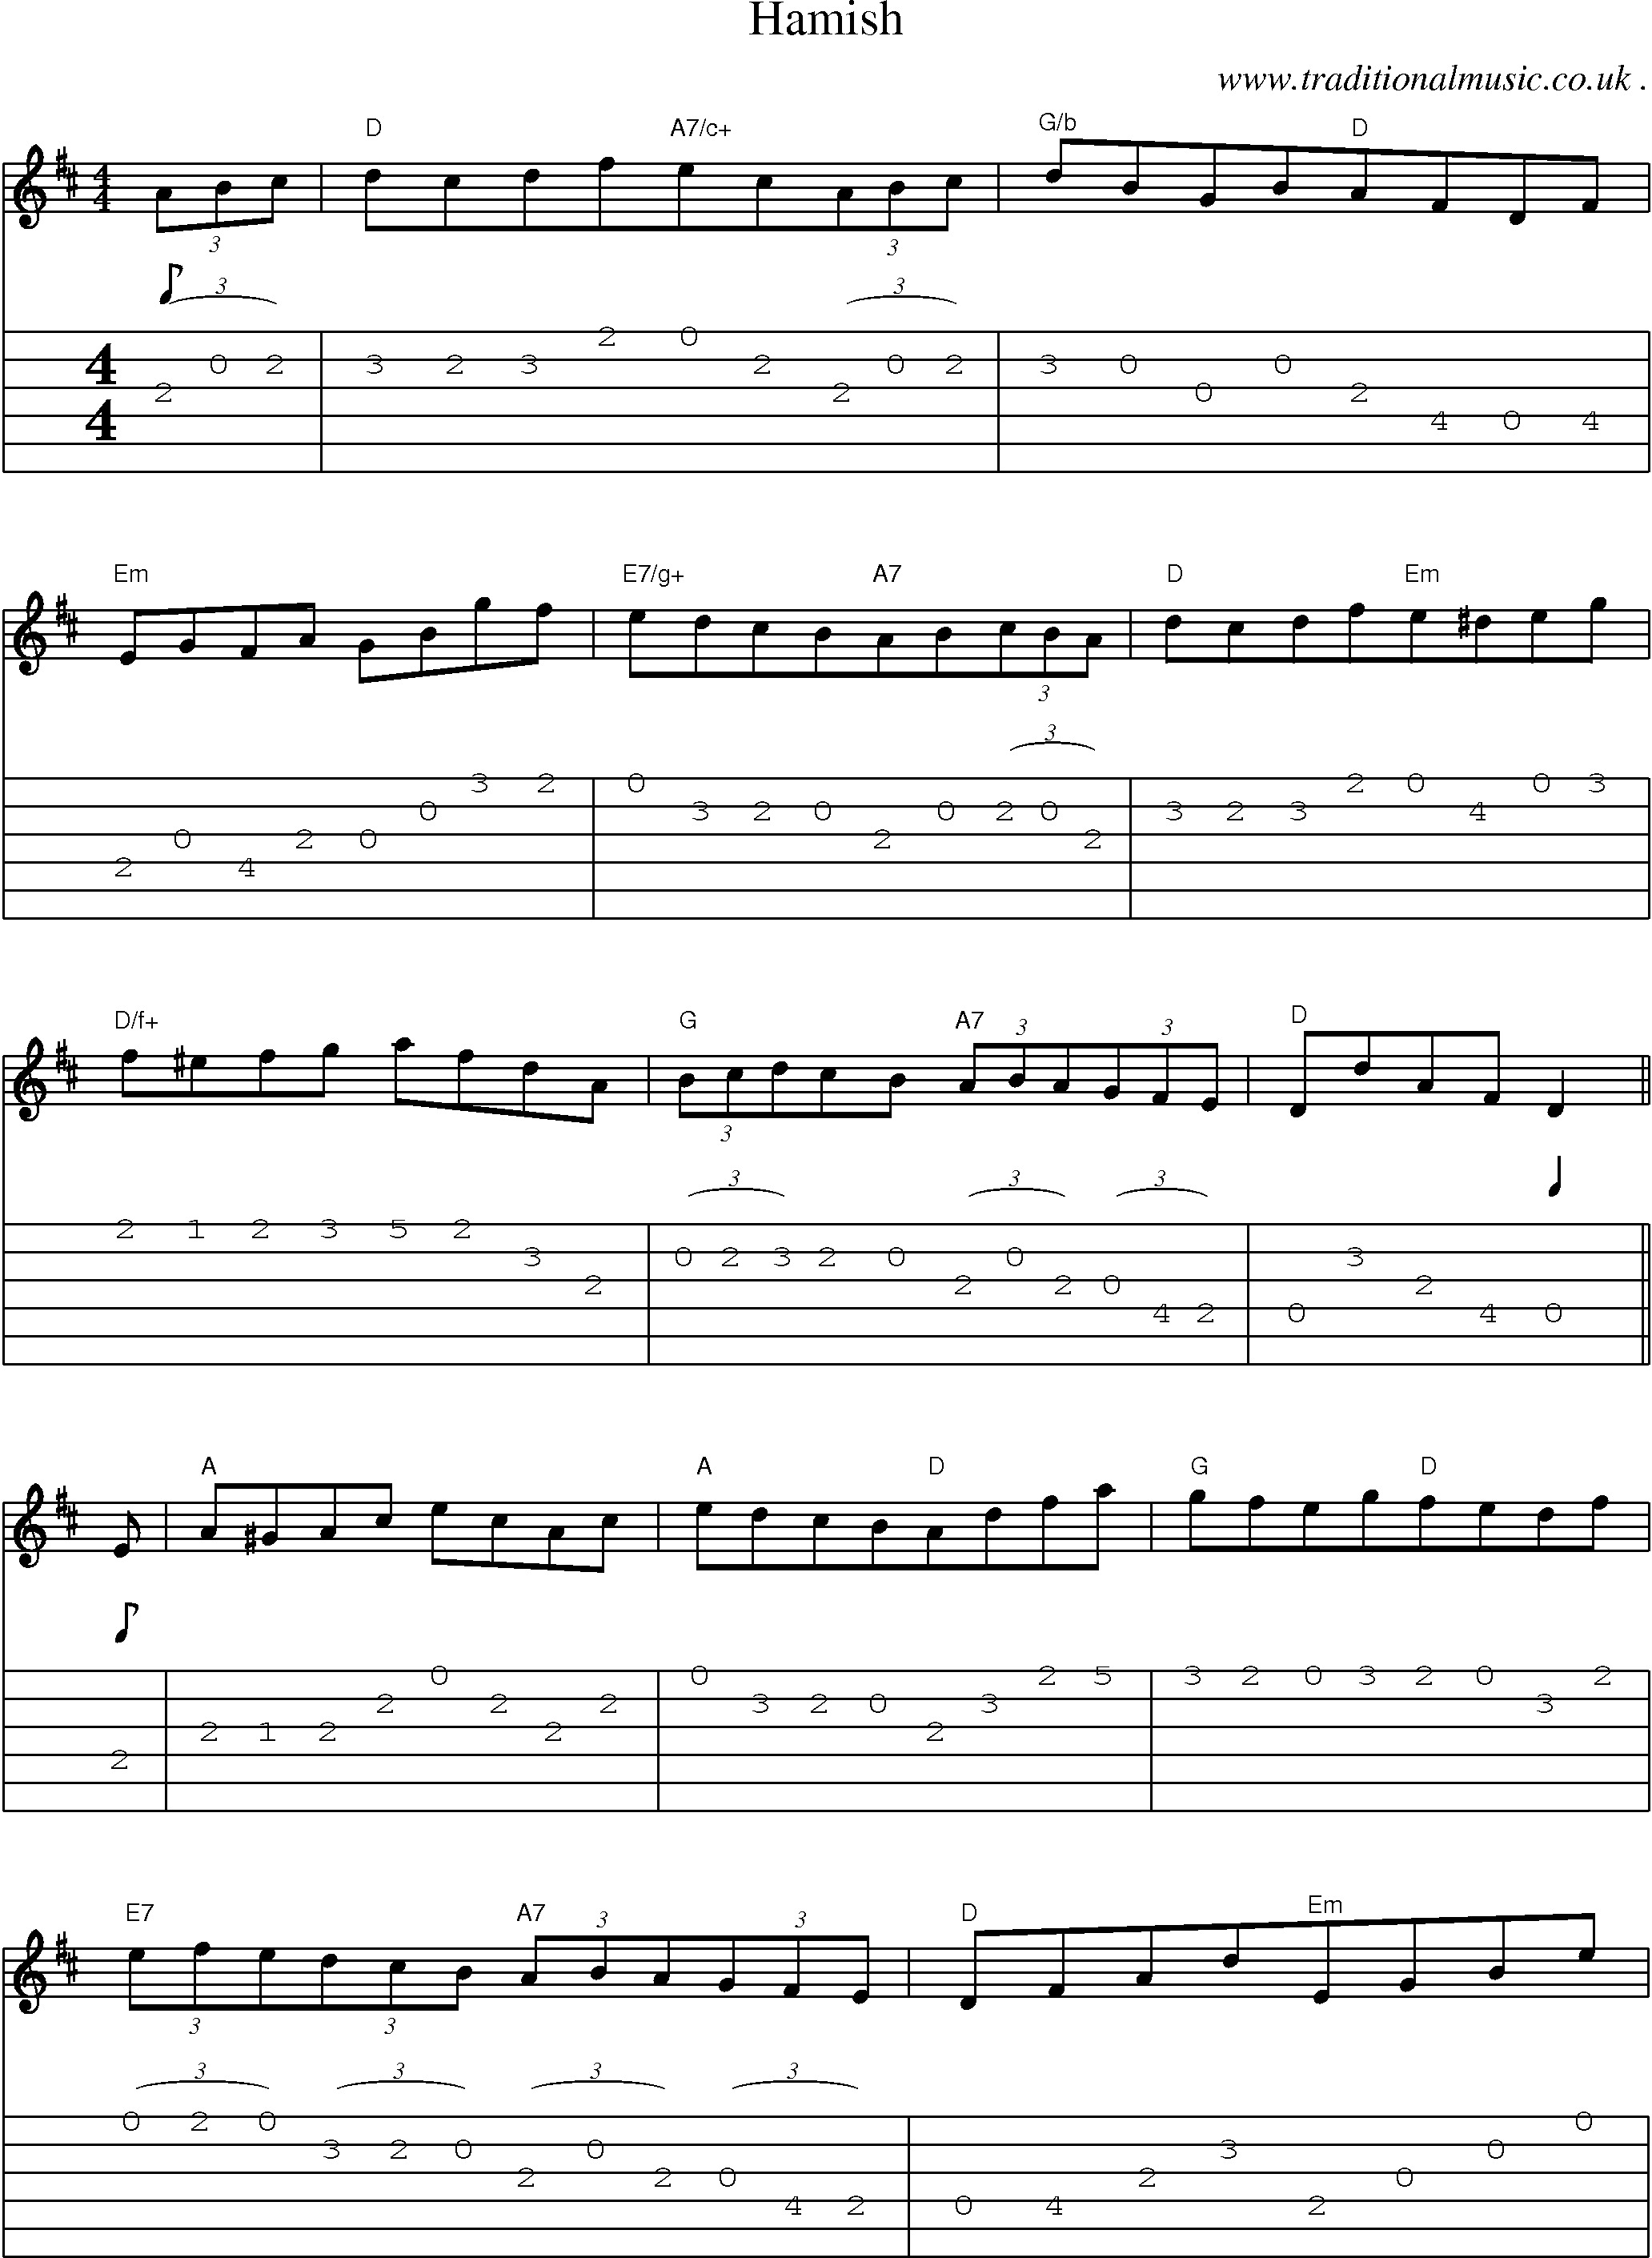 Sheet-Music and Guitar Tabs for Hamish